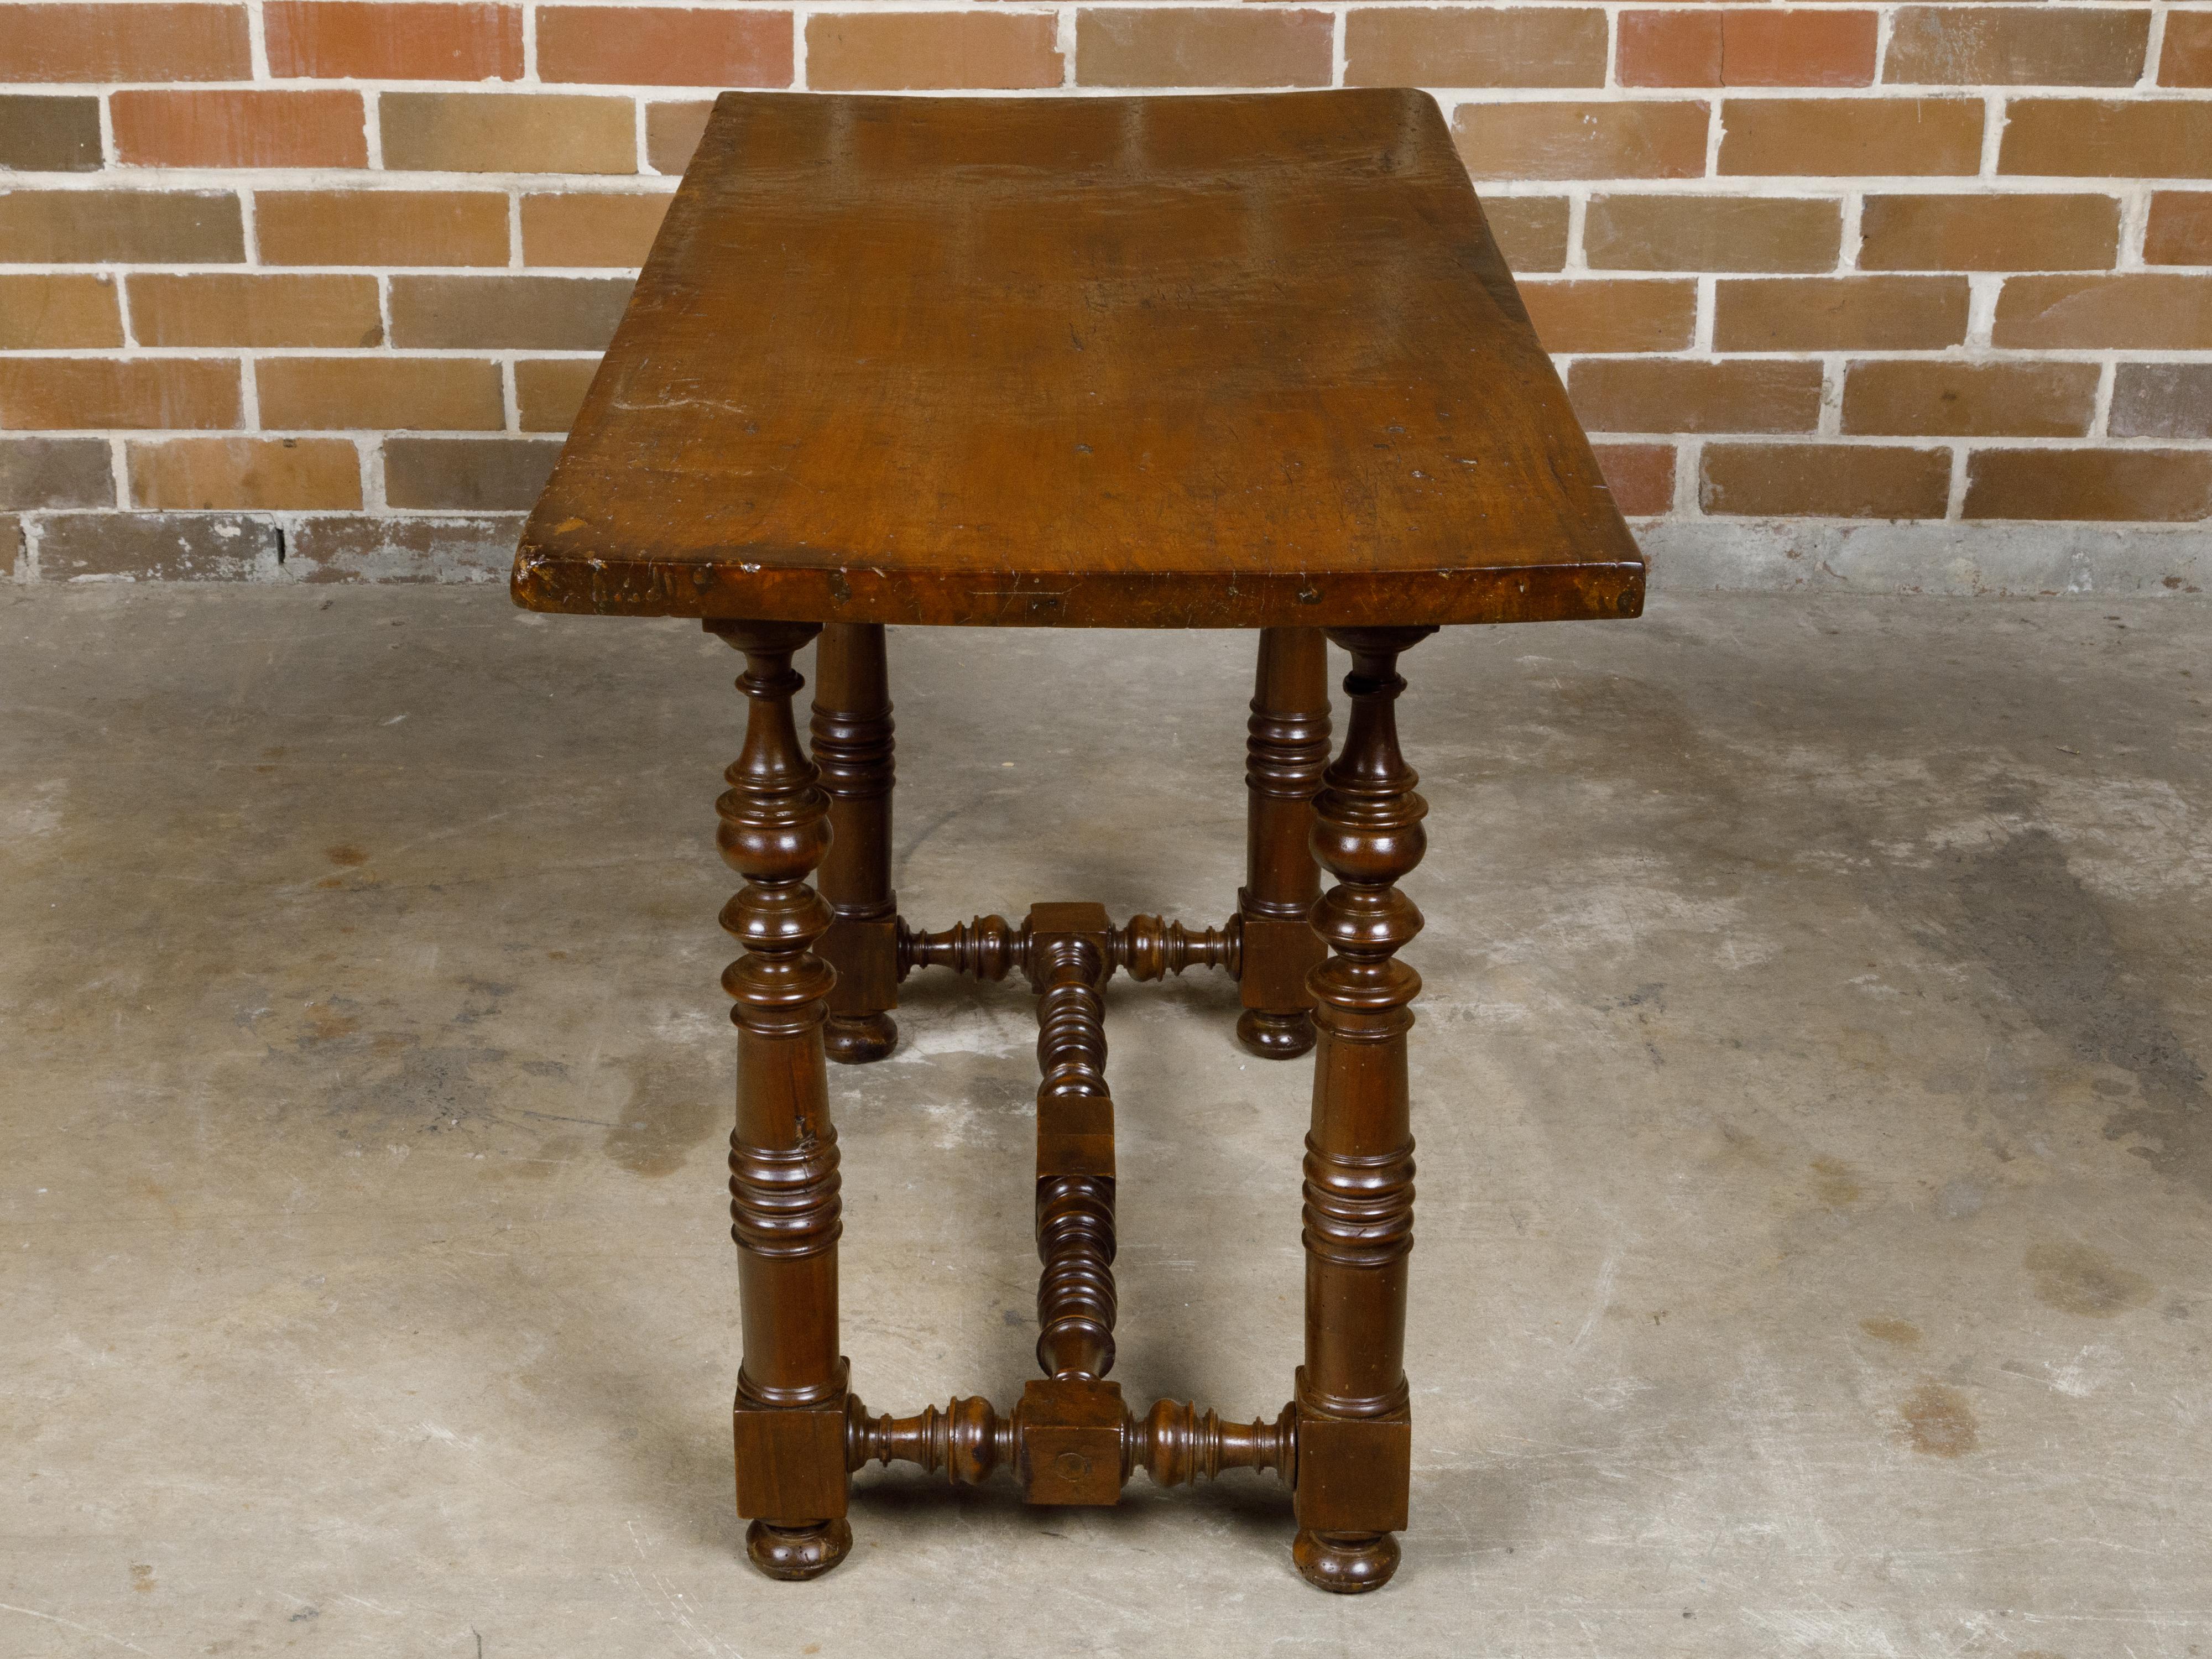 Italian 1800s Walnut Baroque Style Spool Table with H-Form Cross Stretcher For Sale 5